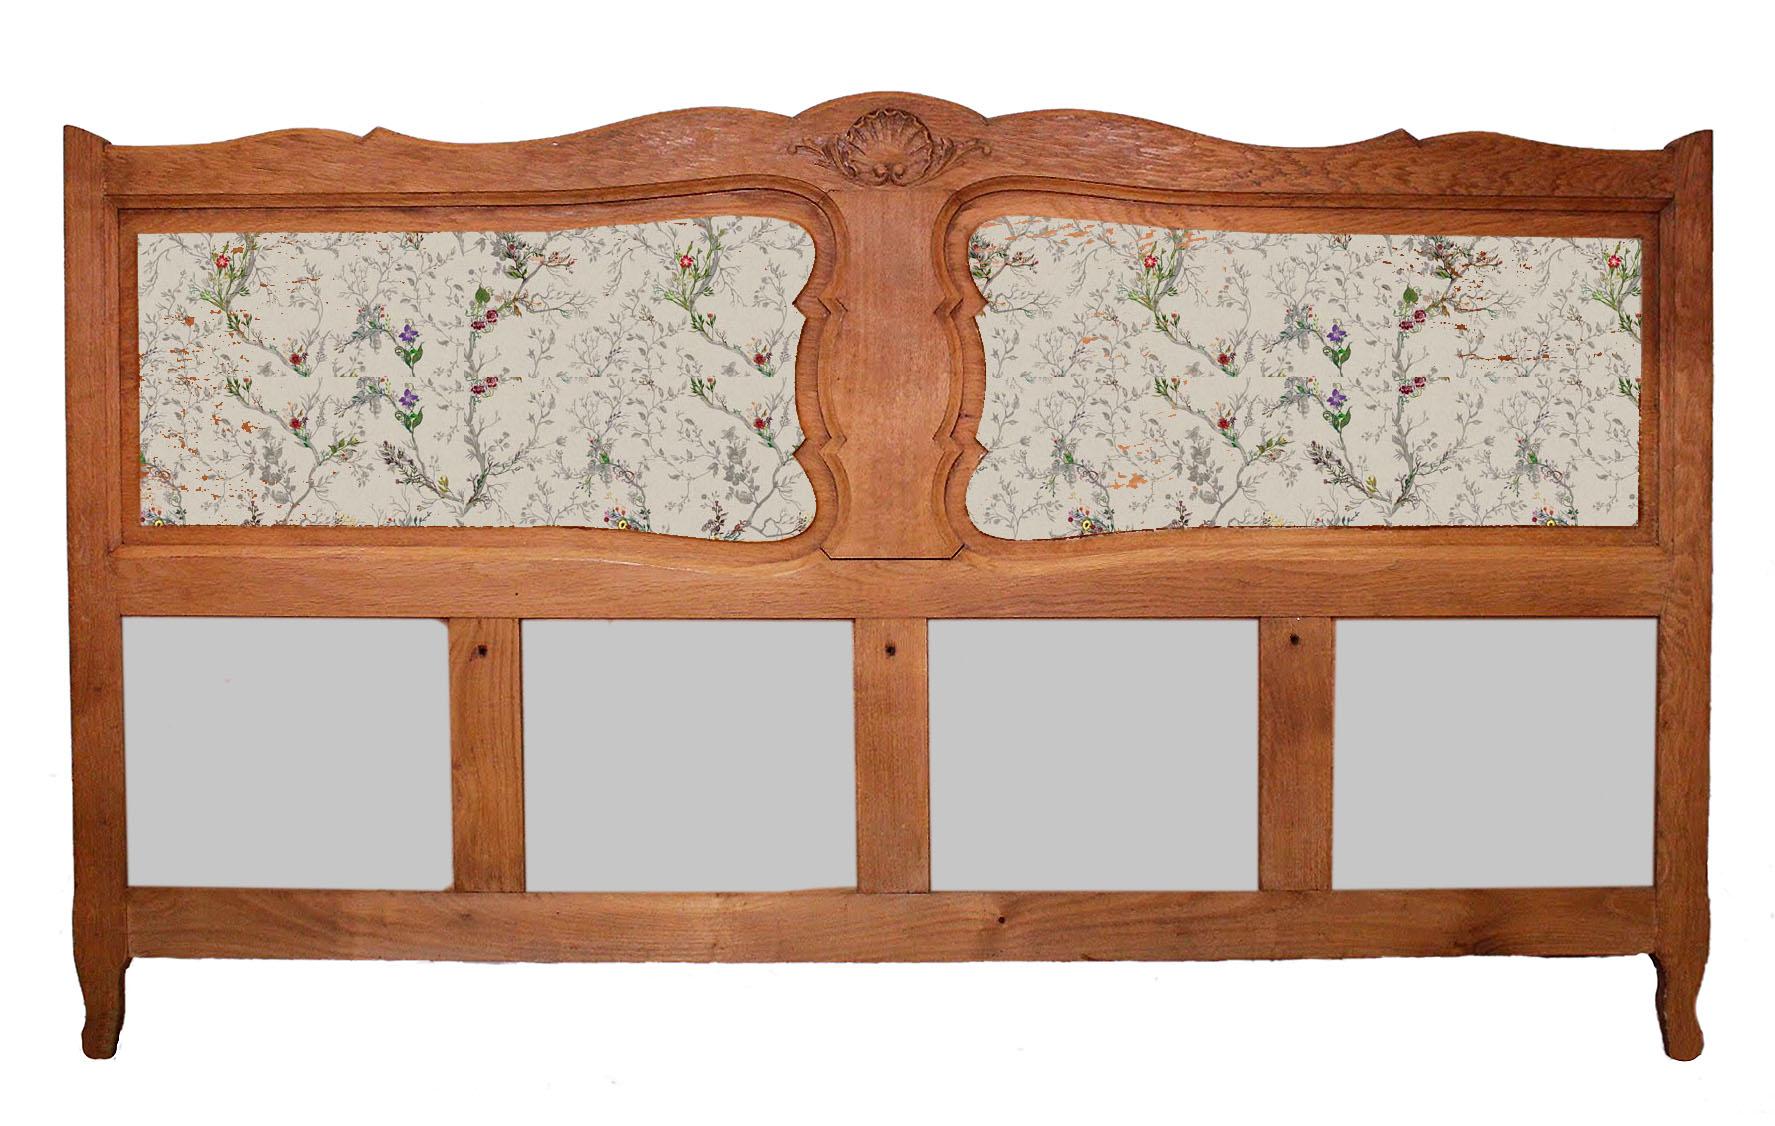 French headboard California king size or Super King Bed Louis early 20th century
Good size 73.6 inches (187cms) wide
Carved oak
Price includes upholstering and recovering to fabric of your choice, excludes cost of fabric, bespoke detailing including